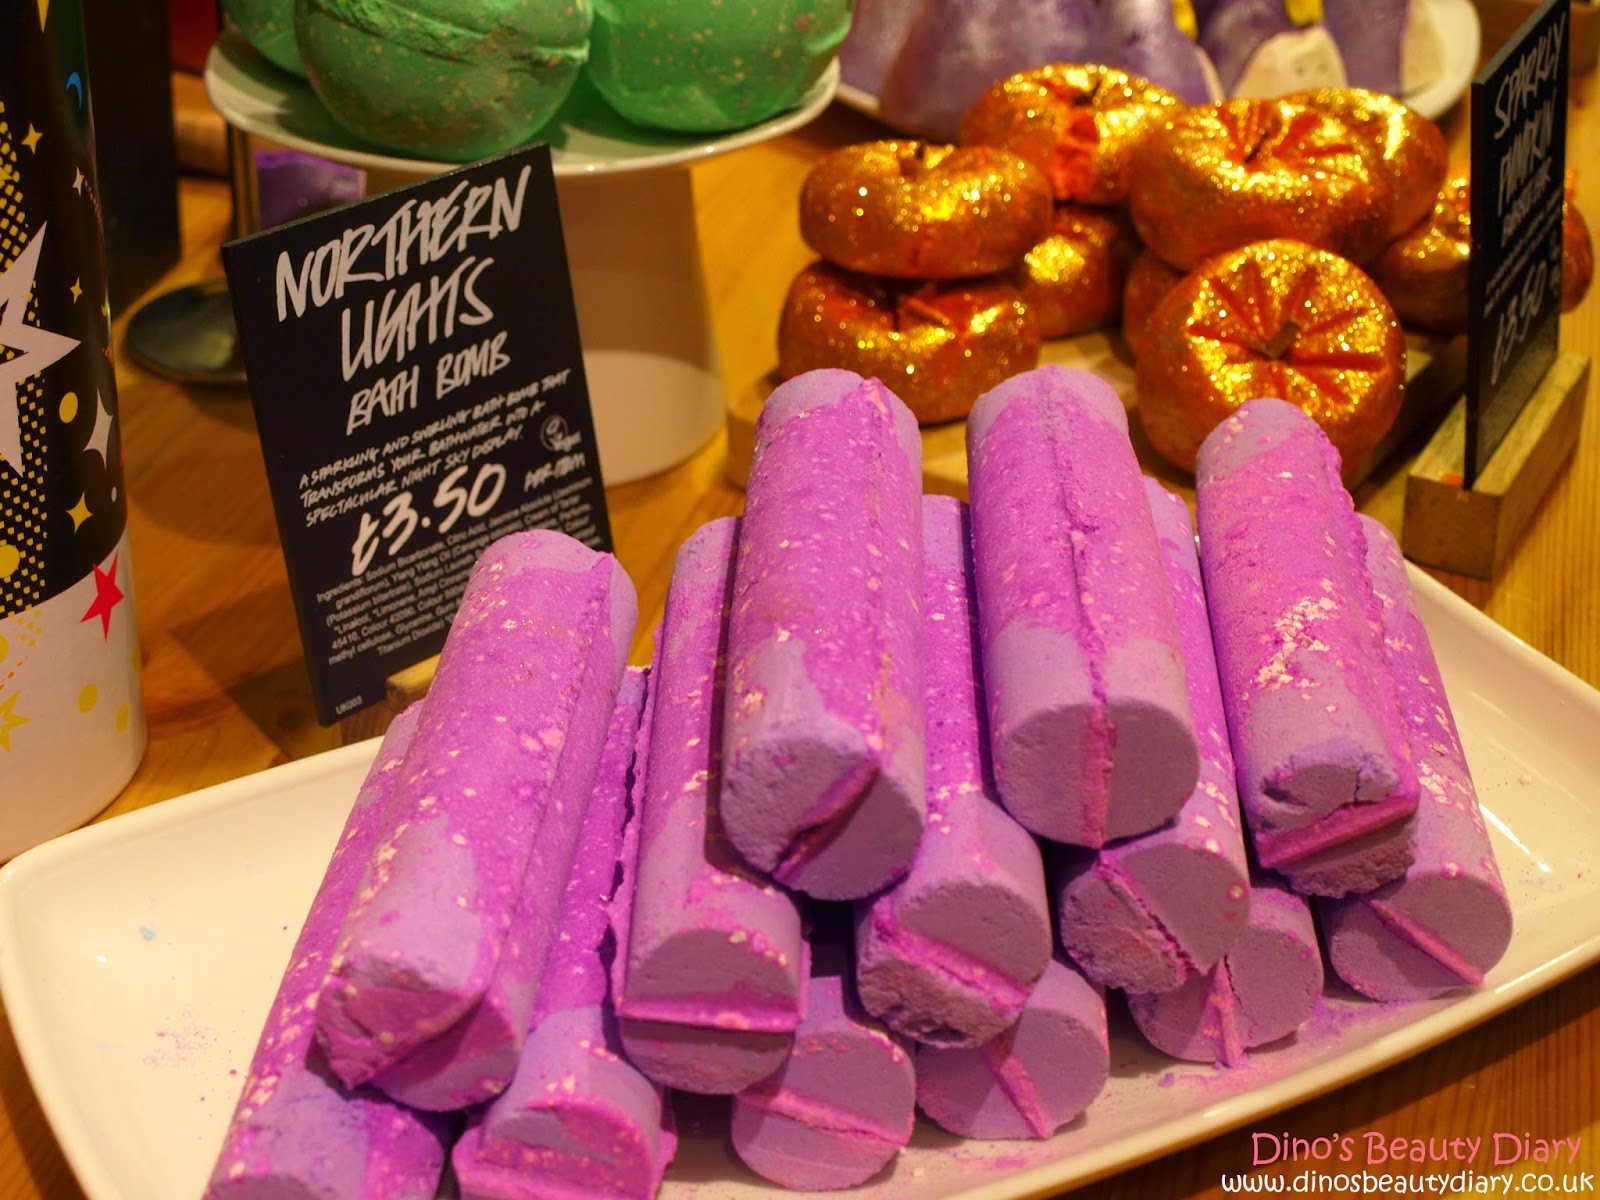 Dino's Beauty Diary - Lush Nottingham Bloggers Event - Northern Lights Bubble Bar